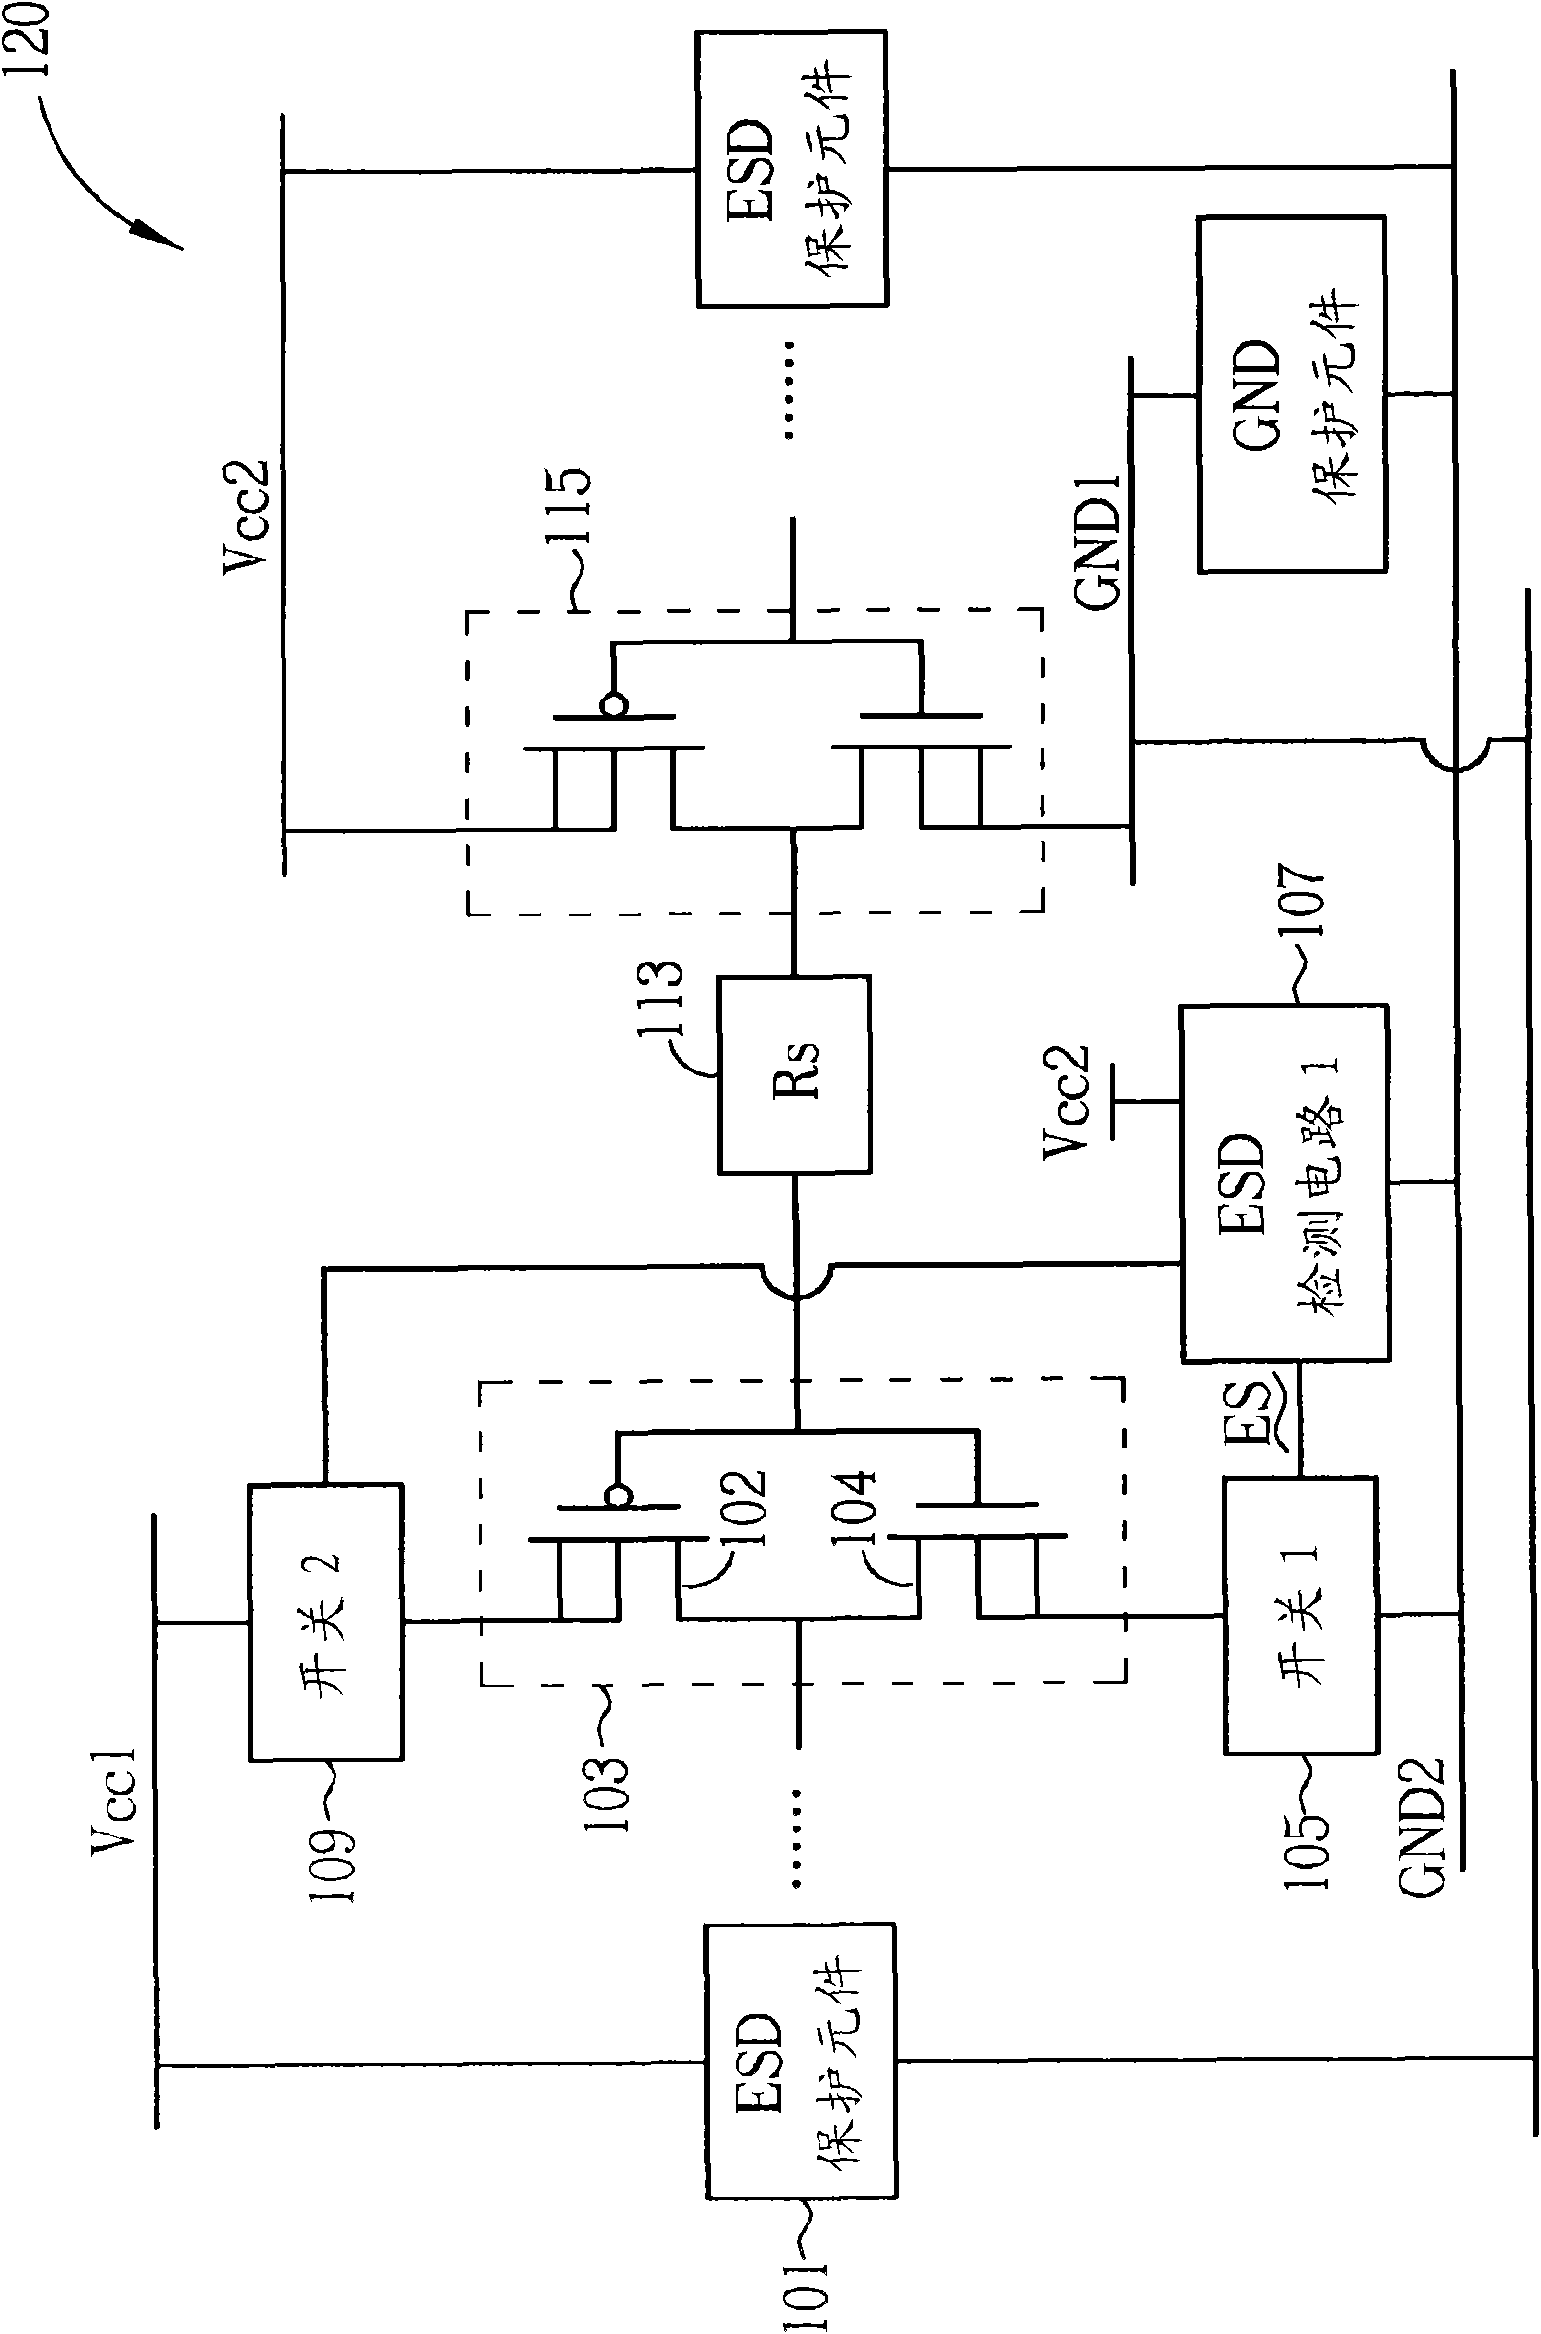 Electrostatic discharge protection circuit with multi-power area integrated circuit